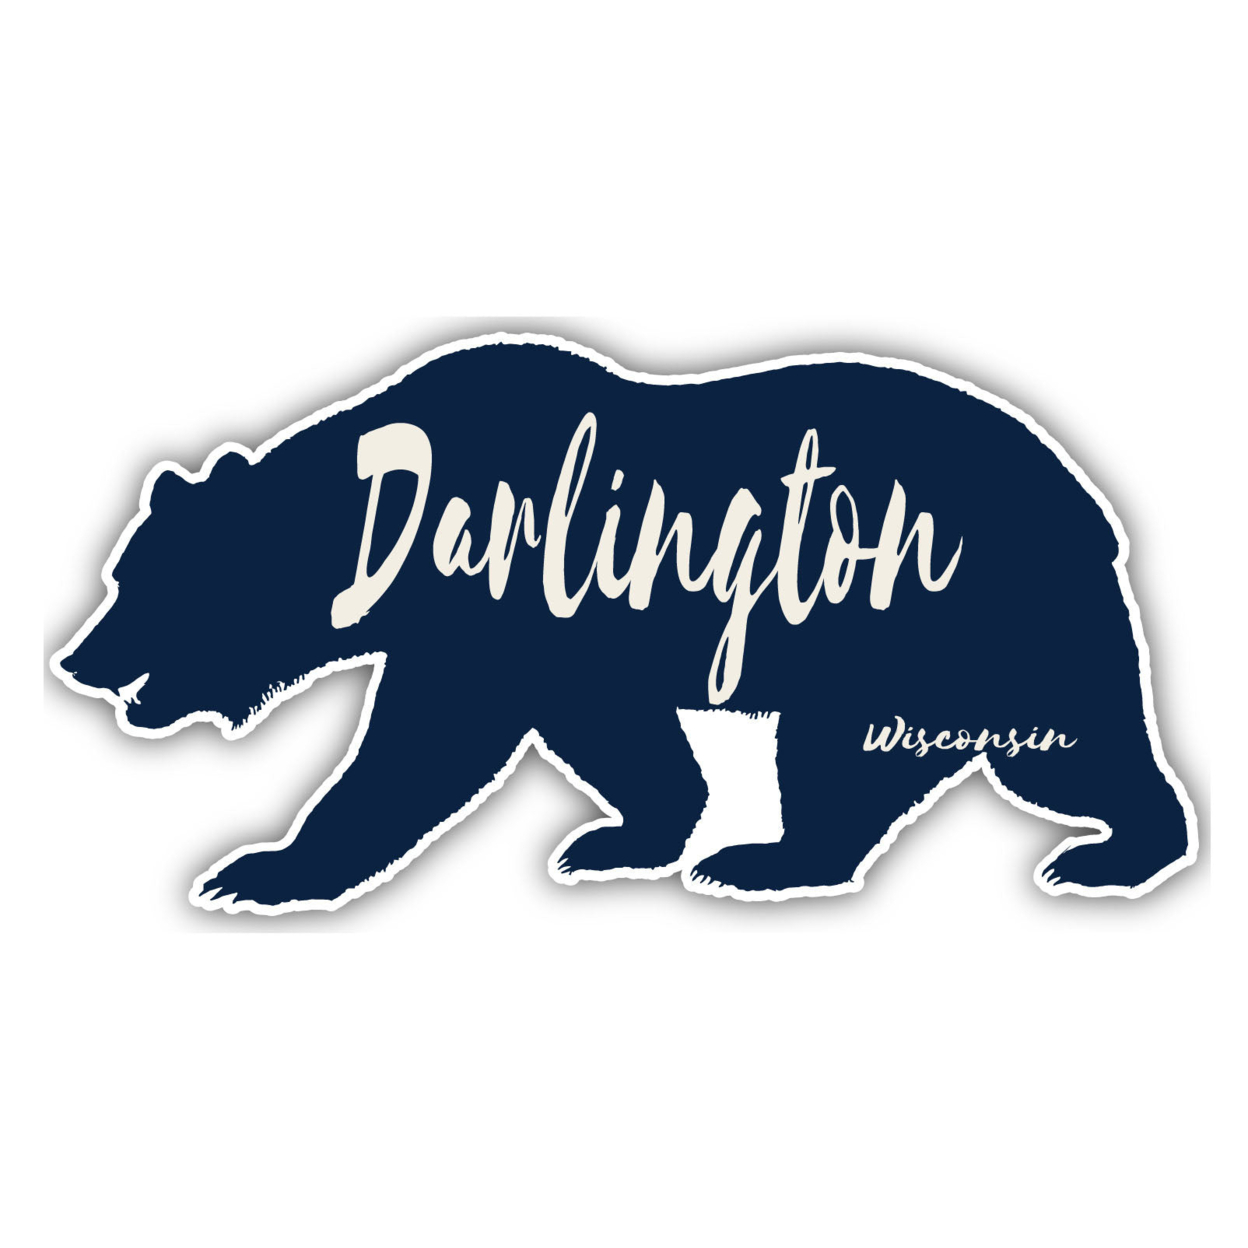 Darlington Wisconsin Souvenir Decorative Stickers (Choose Theme And Size) - 4-Pack, 4-Inch, Bear